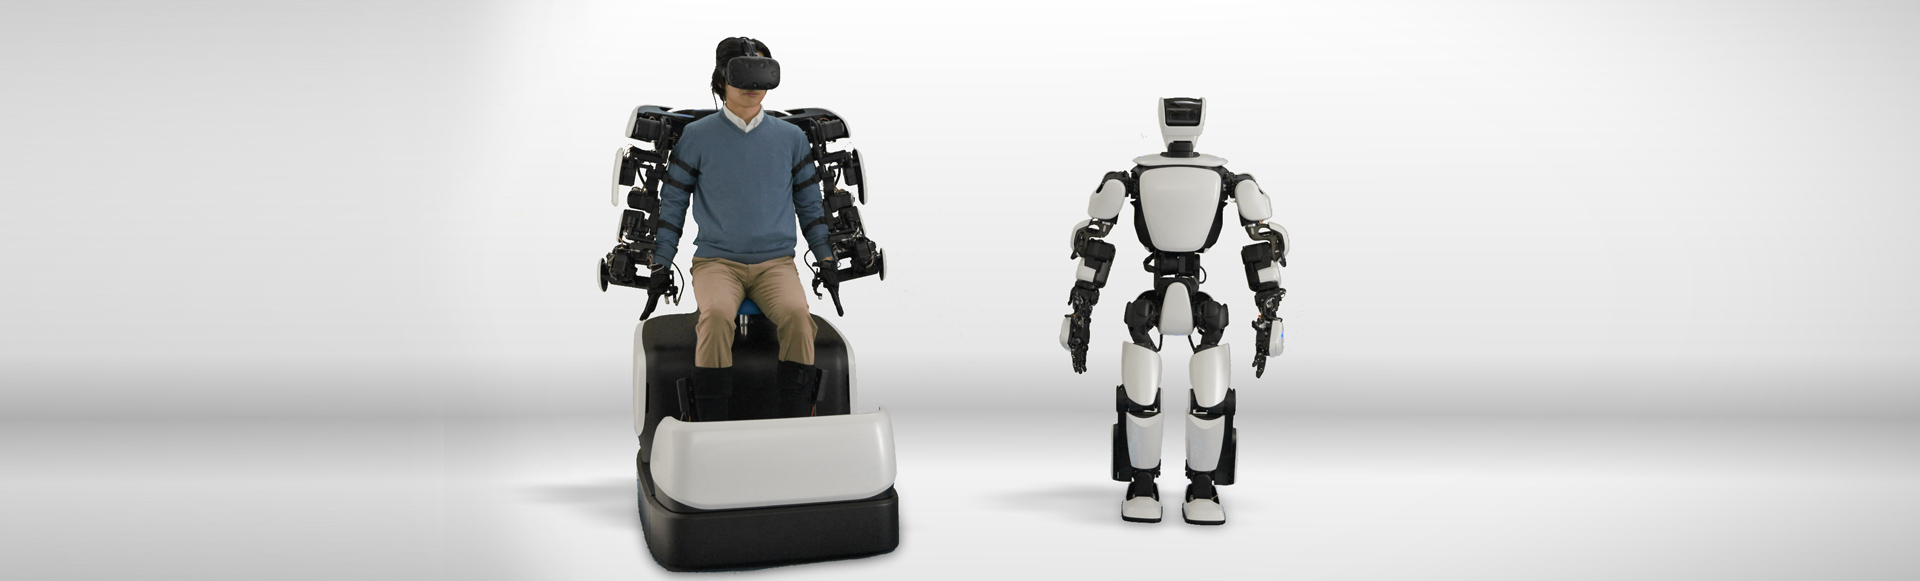 DOCOMO and Toyota Conduct Successful Remote Control of T-HR3 Humanoid Robot Using 5G